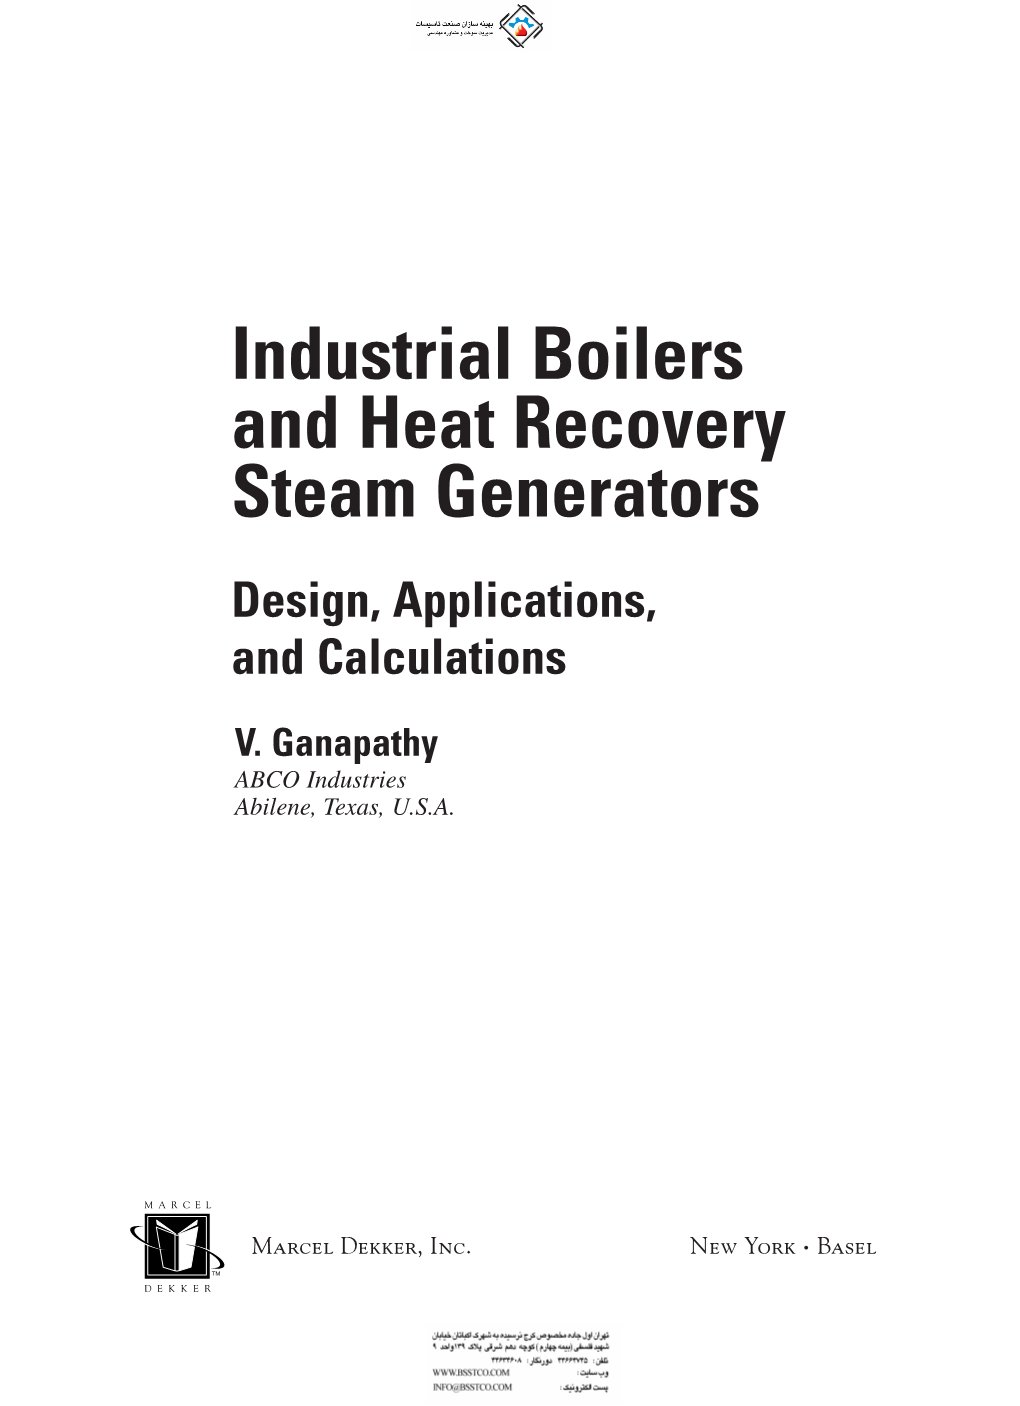 Industrial Boilers and Heat Recovery Steam Generators Design, Applications, and Calculations